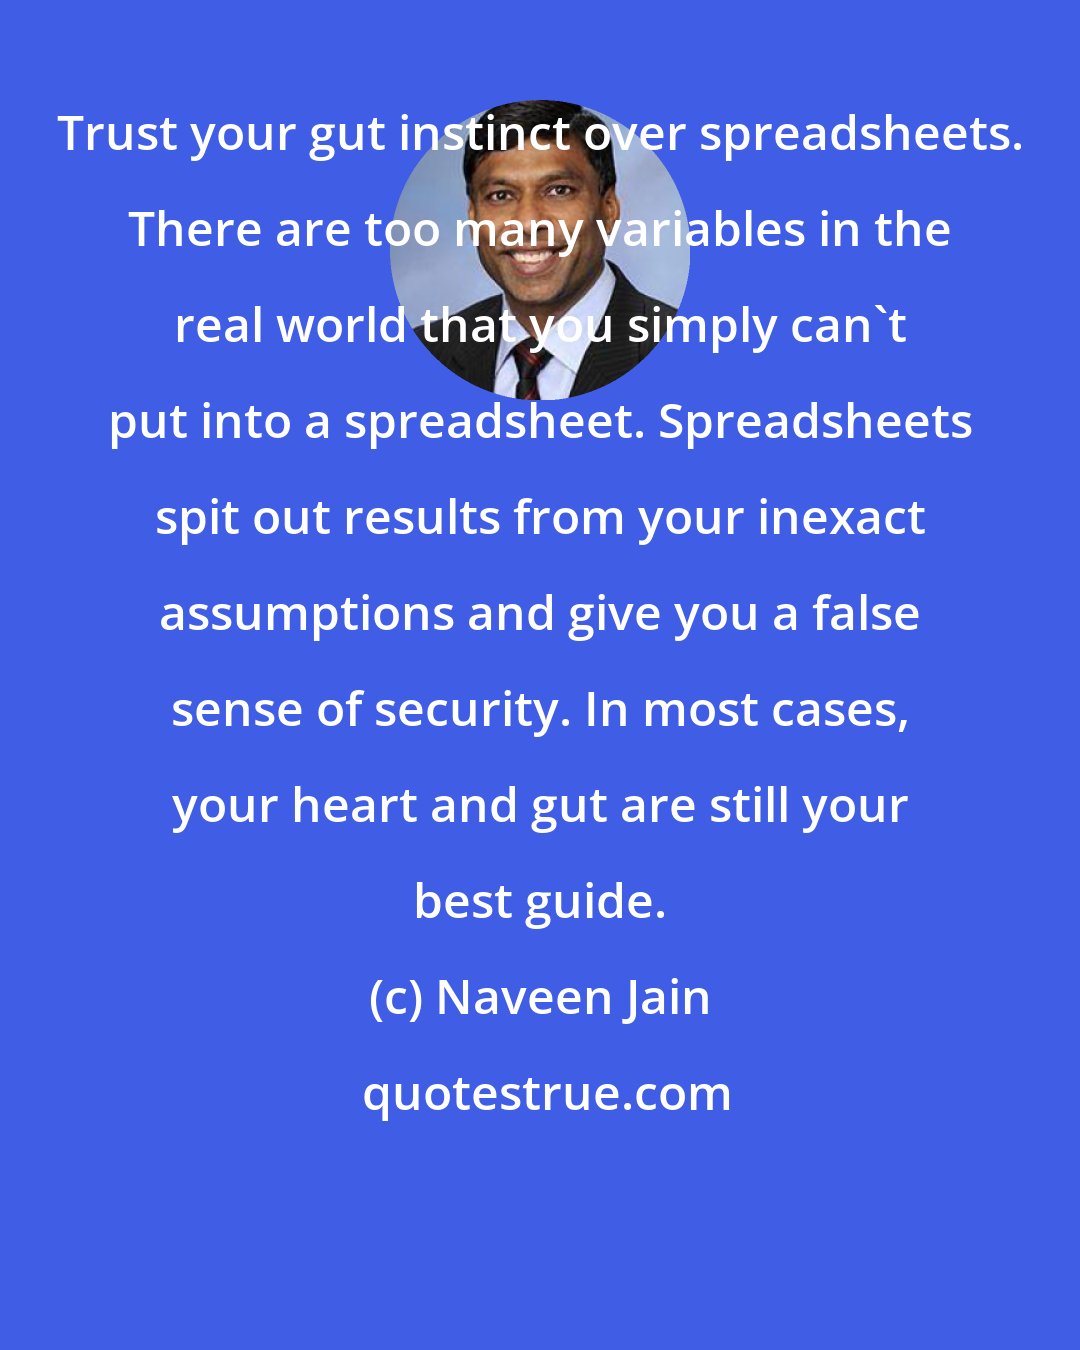 Naveen Jain: Trust your gut instinct over spreadsheets. There are too many variables in the real world that you simply can't put into a spreadsheet. Spreadsheets spit out results from your inexact assumptions and give you a false sense of security. In most cases, your heart and gut are still your best guide.